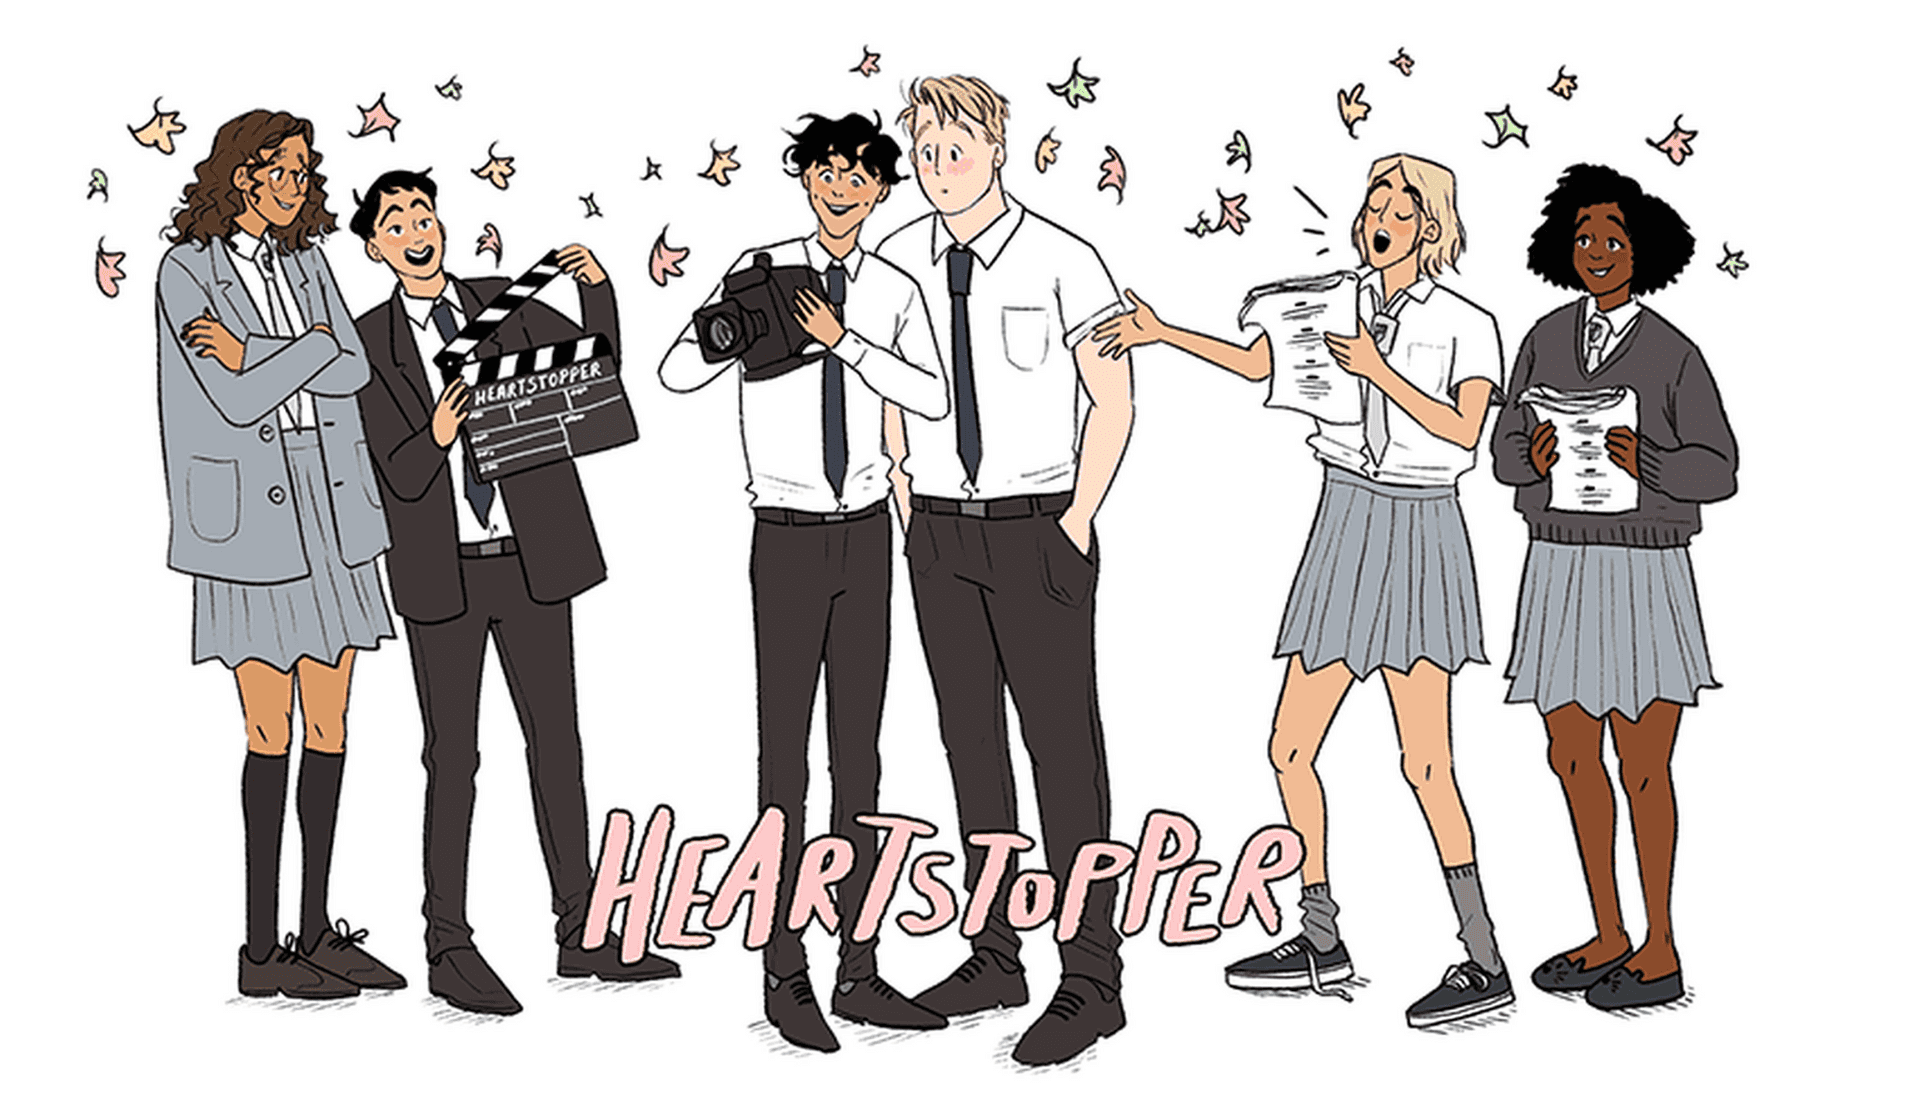 Heartstopper Background s for FREE